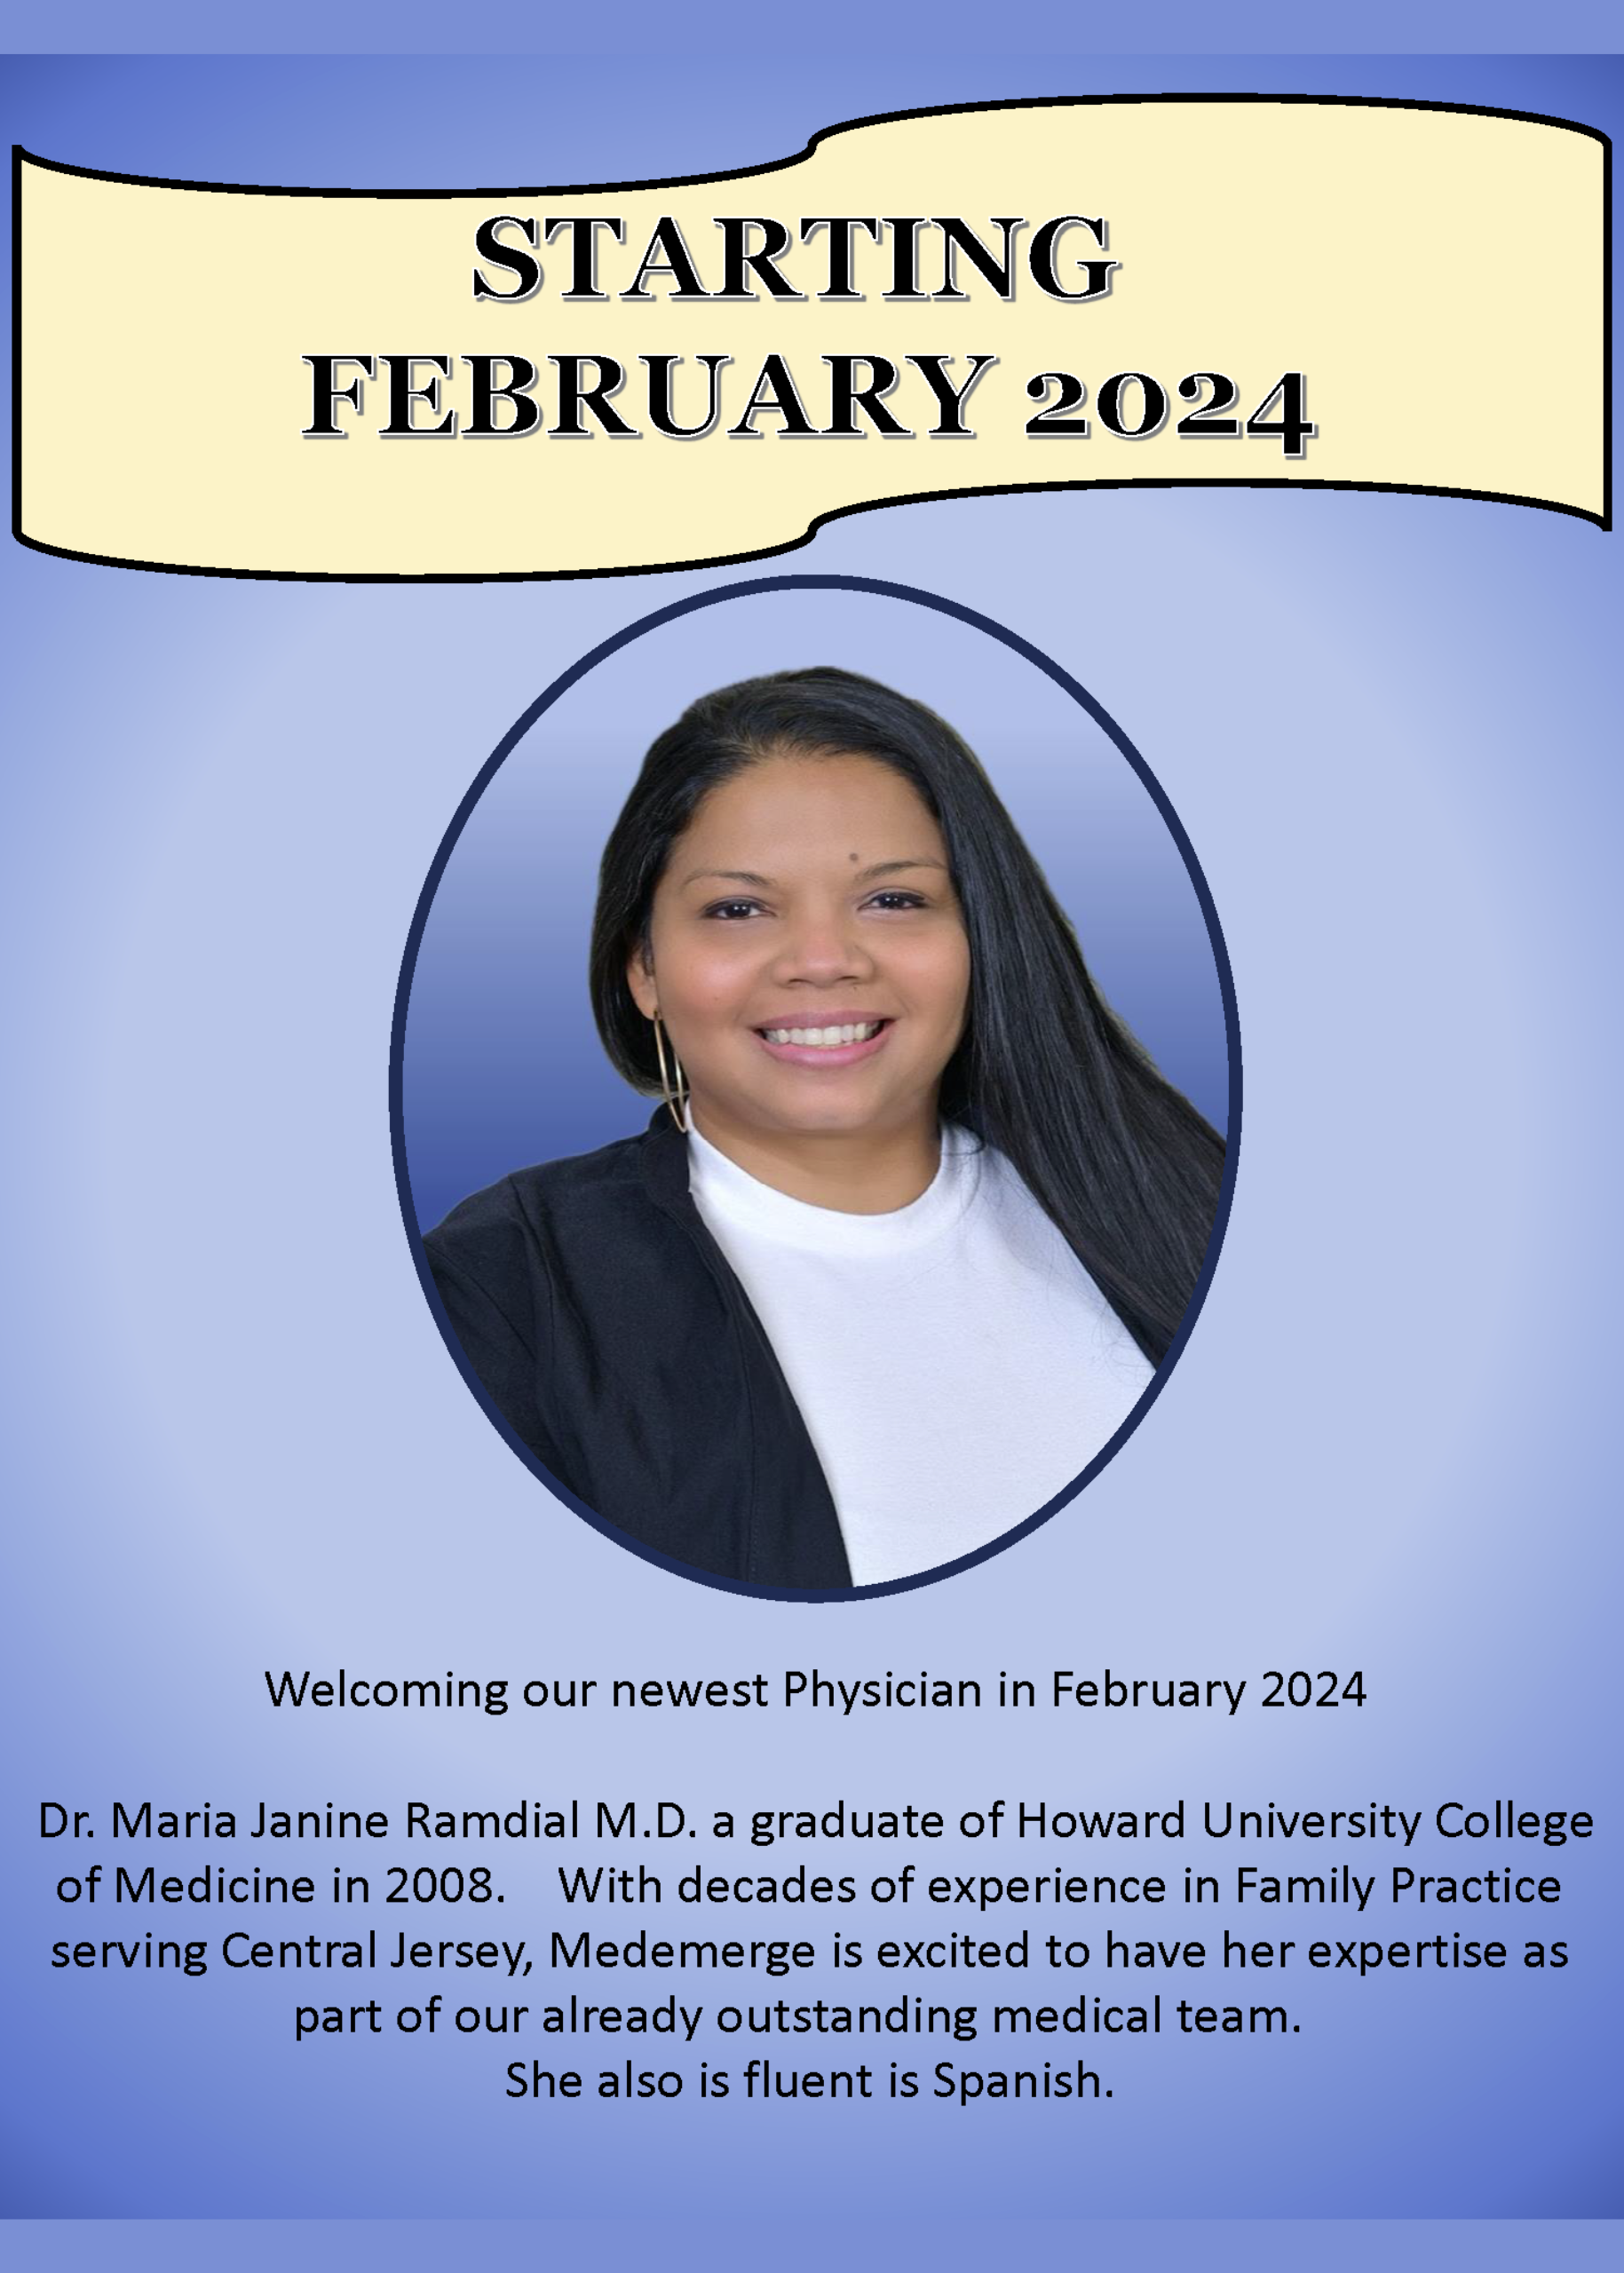 Dr. Maria Janine Ramdial M.D.